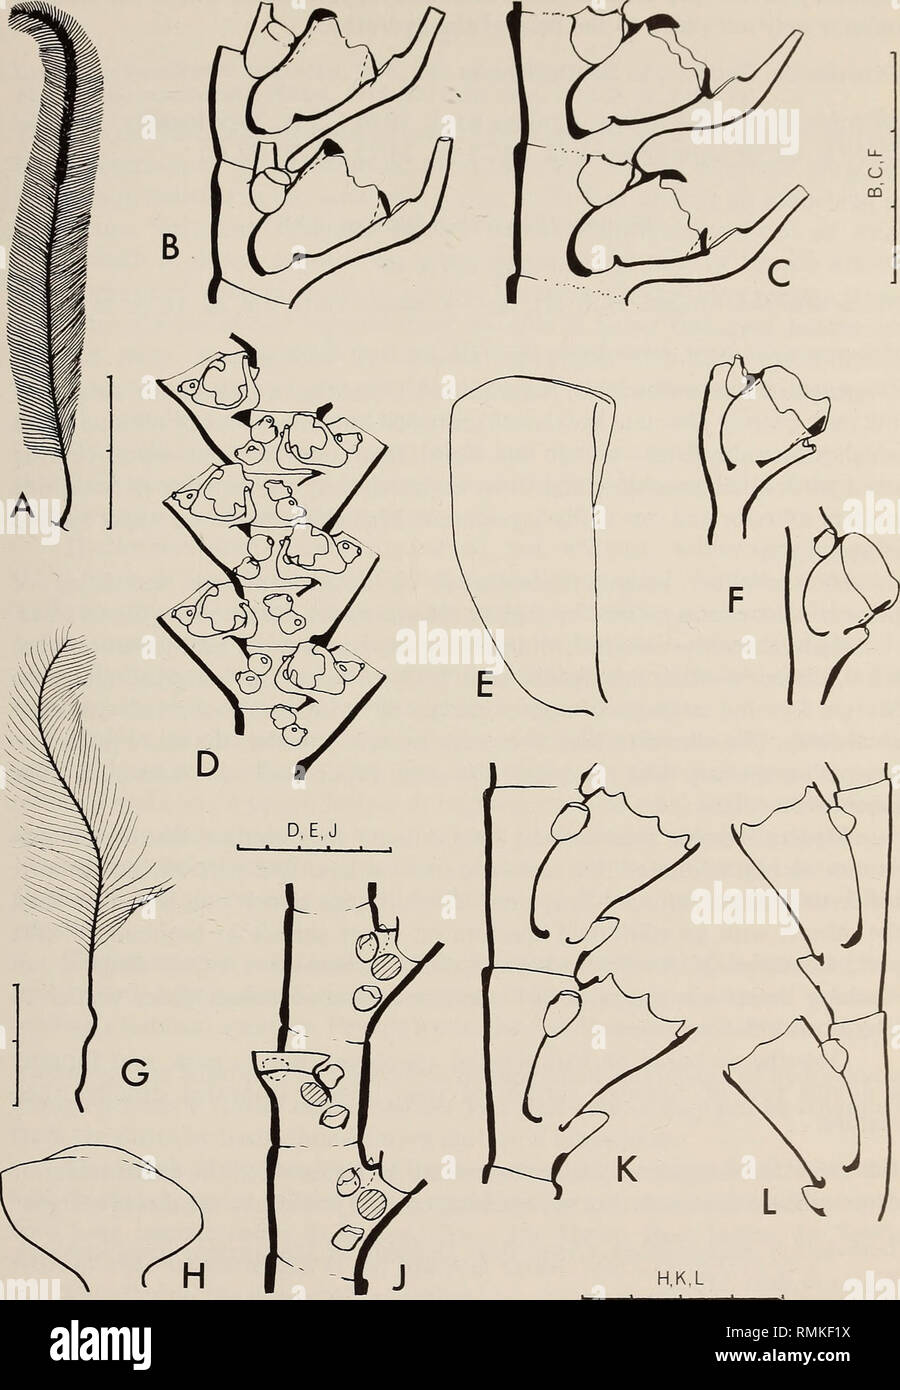 . Annals of the South African Museum = Annale van die Suid-Afrikaanse Museum. Natural history. MONOGRAPH ON THE HYDROIDA OF SOUTHERN AFRICA 439. Fig. 135. Gymnangium arcuatum. A, fertile stem; B and C, hydrothecae from distal and proximal ends of hydrocladium; D, anterior view of stem showing origins of hydrocladia; E, male gono- theca; F, hydrothecae of epizootic form. Gymnangium exsertum. G, stem; H, gonotheca; J, anterior view of stem showing scars for gonothecae (shaded) and origins of hydrocladia; K, hydrocladium; L, hydrocladium of epizootic form. Scale: A and G in cm, the rest in mm/10. Stock Photo